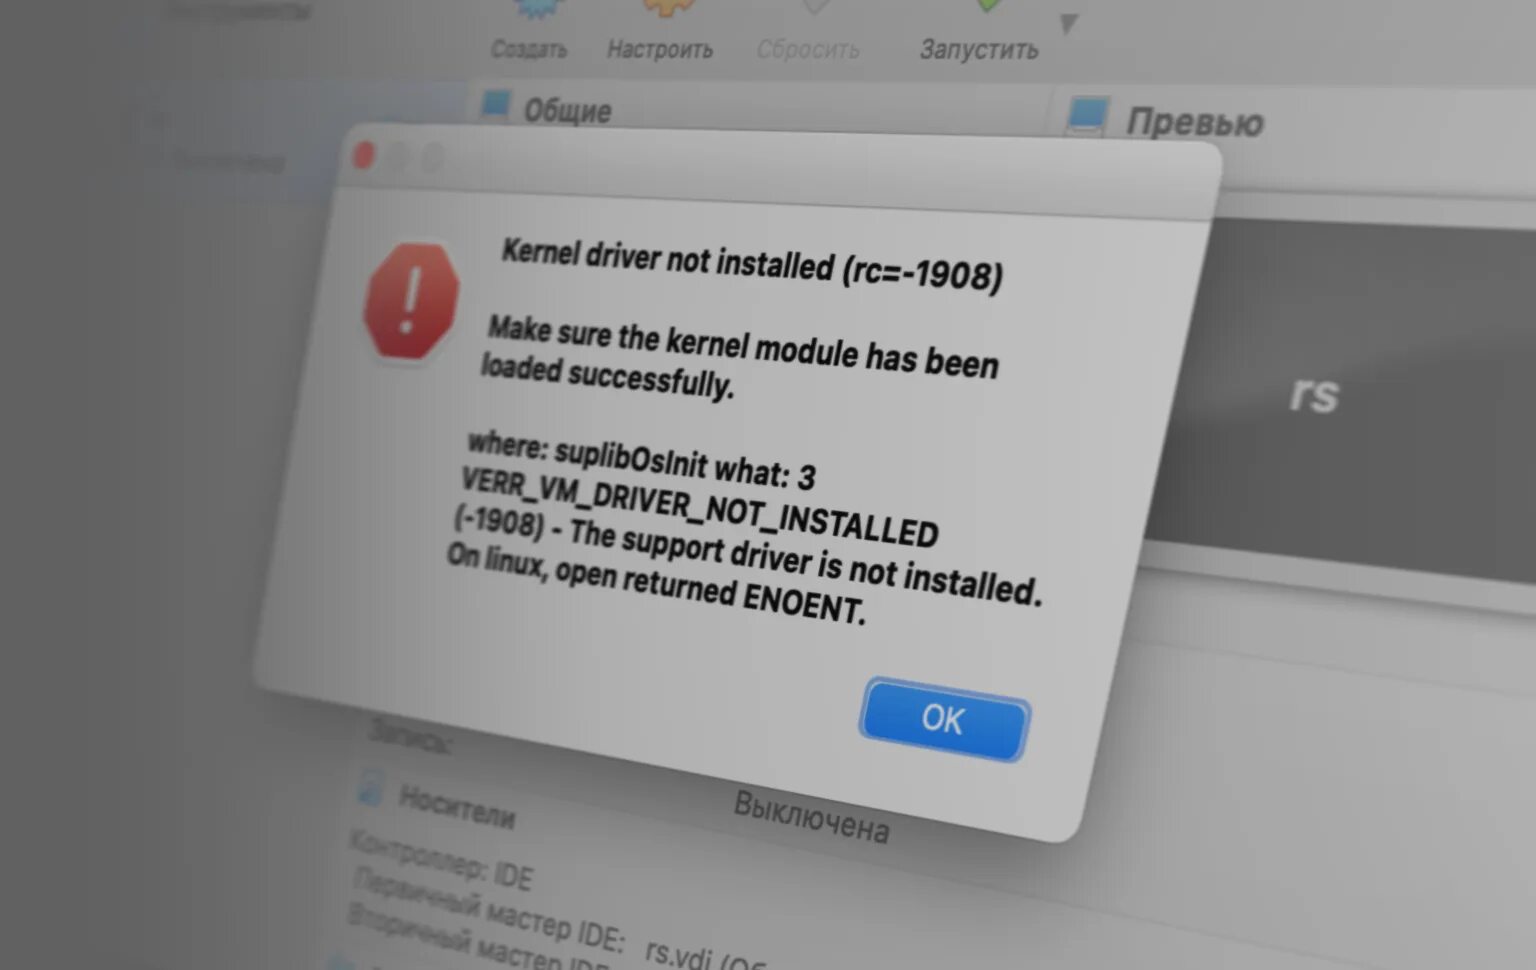 Kernel Driver not installed RC 1908 VIRTUALBOX. Ошибка Kernel Mac os. Error Kernel Driver not installed 1908. Metal Driver not Inited на Мак.